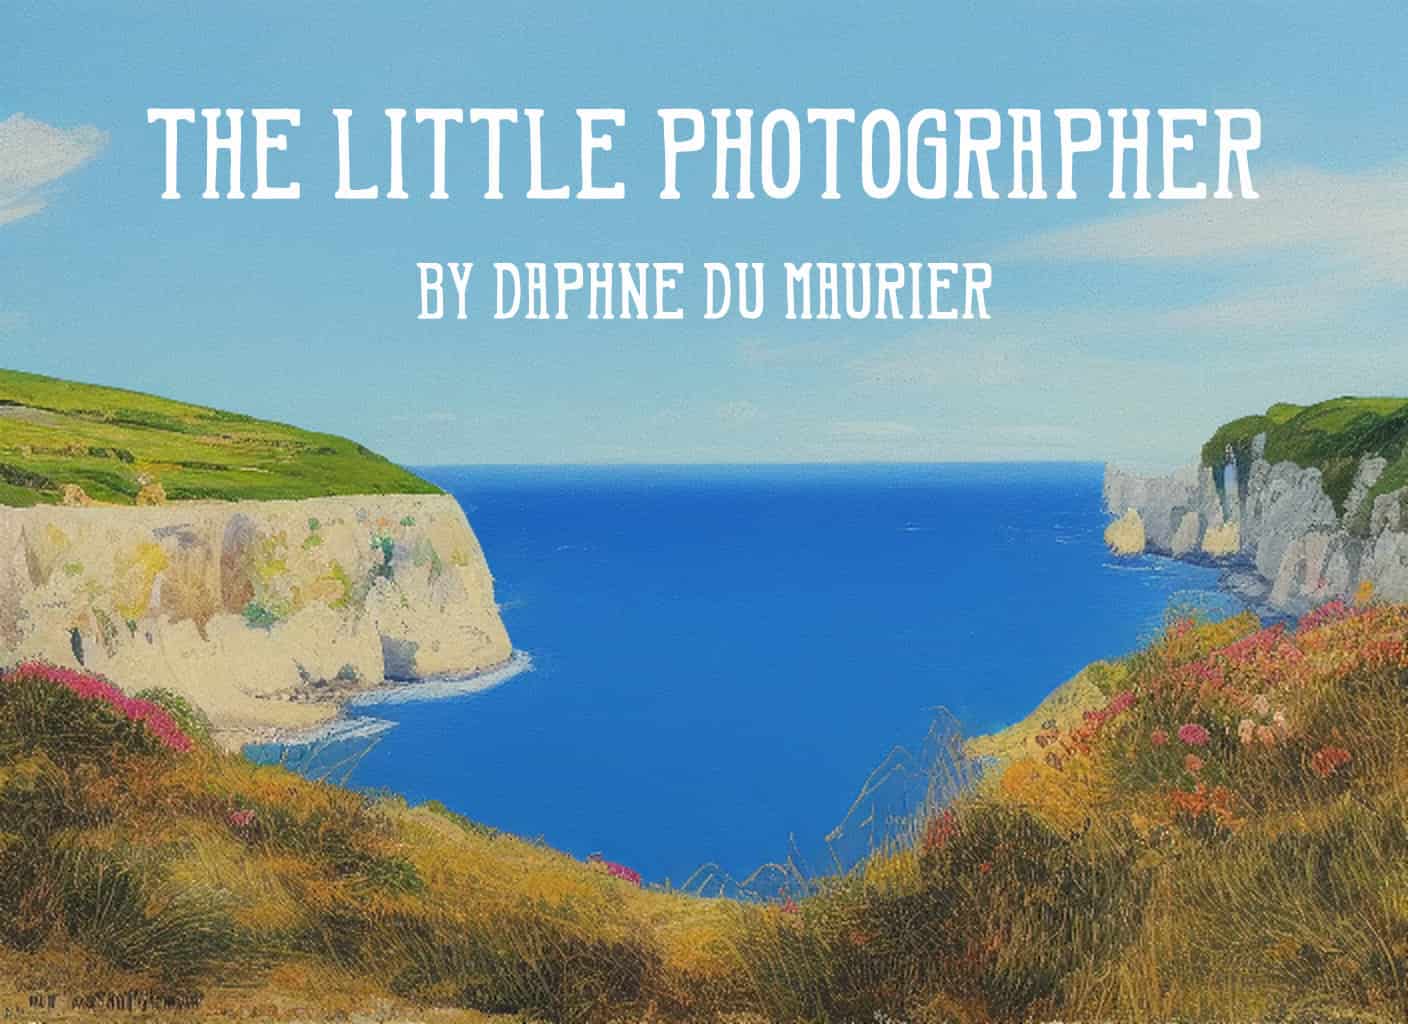 The Little Photographer by Daphne du Maurier Short Story Analysis